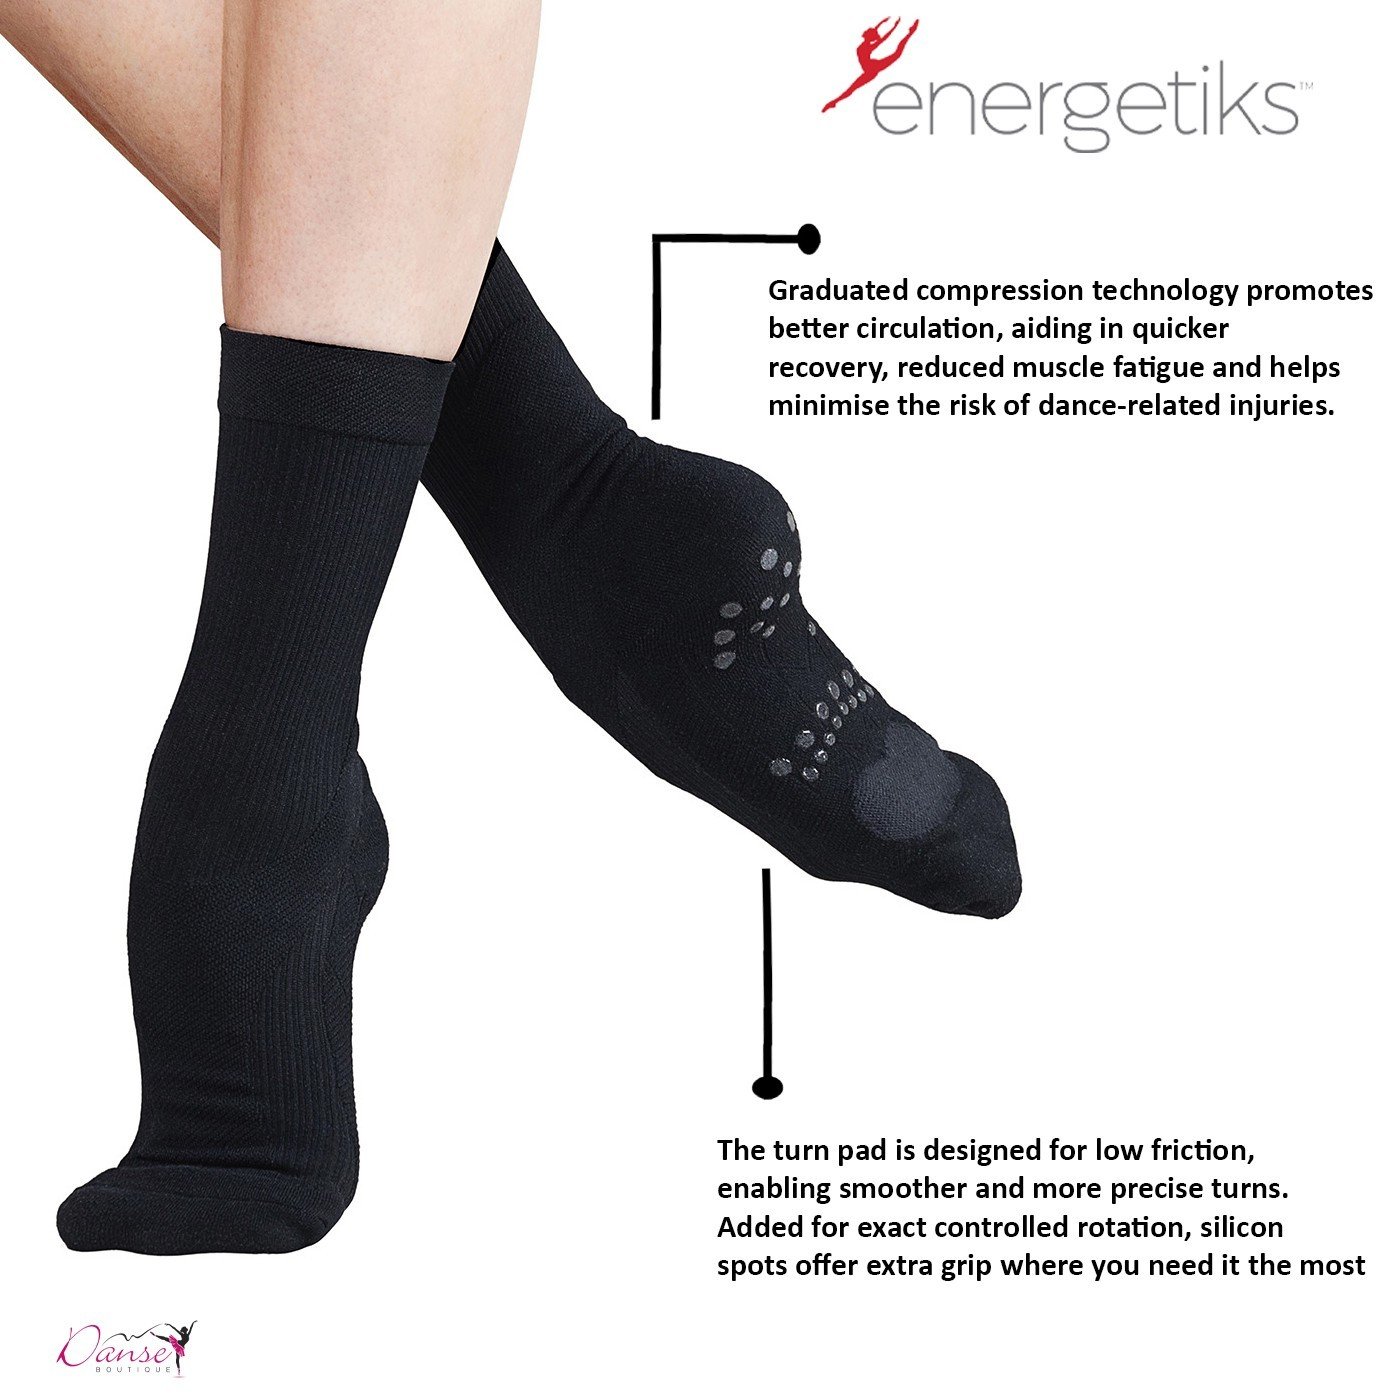 New In Store! Introducing PivotPerfect&trade; Dance Socks by @energetiks😍⁠
Tailored for dancers, providing ultimate control, precision and comfort. ⁠
⁠
Crafted using cutting-edge compression technology to improve corculation, facilitating faster rec